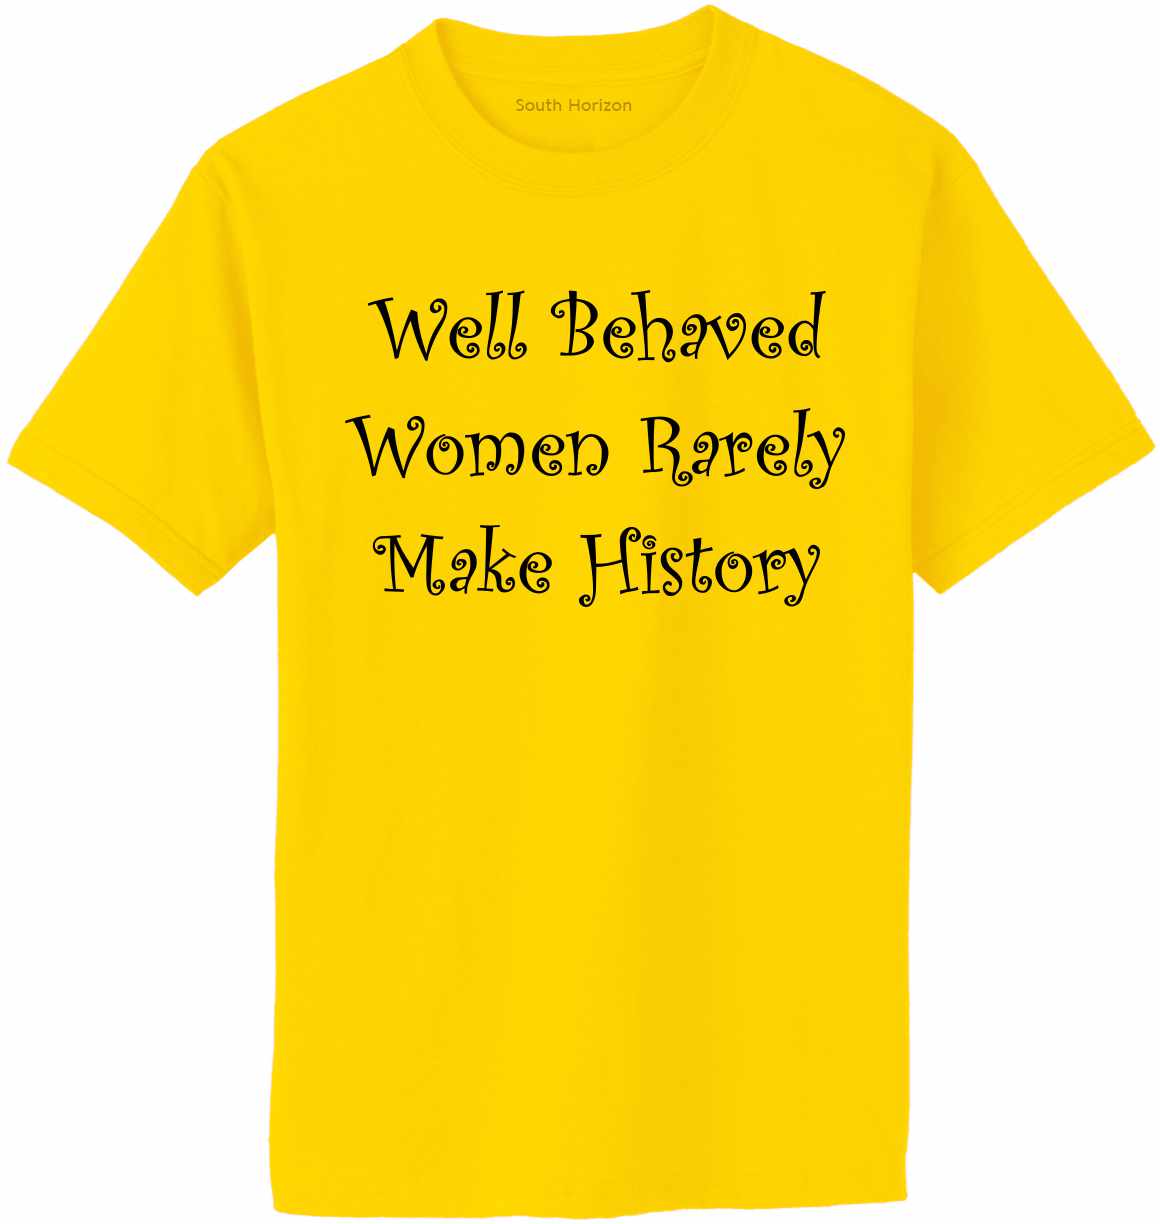 Well Behaved Women Rarely Make History Adult T-Shirt (#487-1)